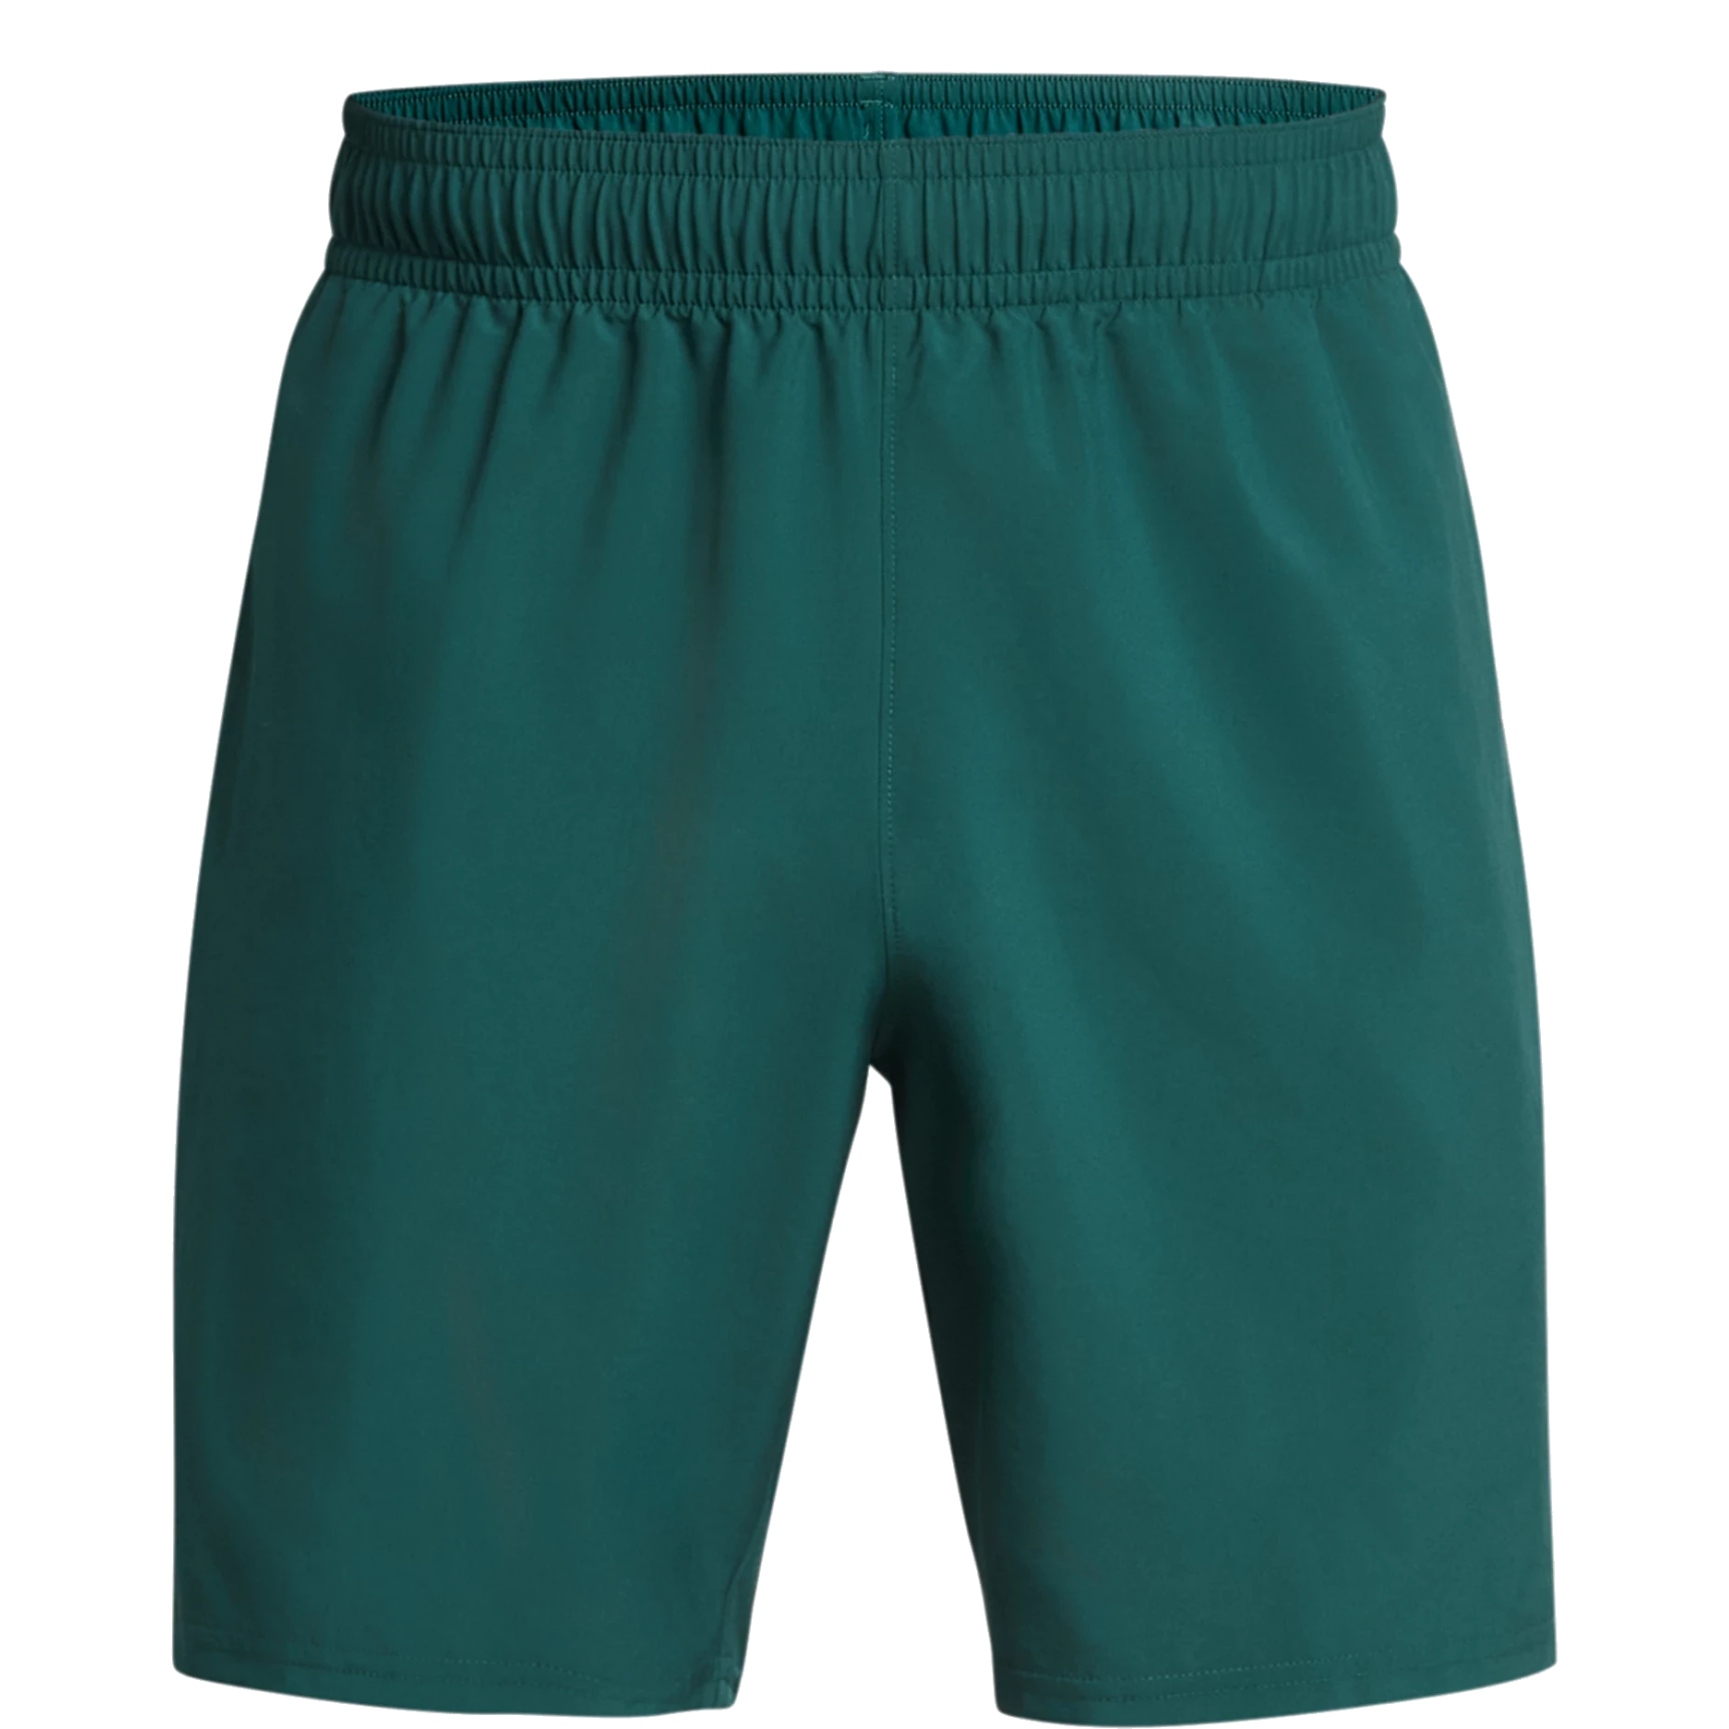 Picture of Under Armour UA Woven Wordmark Shorts Men - Hydro Teal/Radial Turquoise